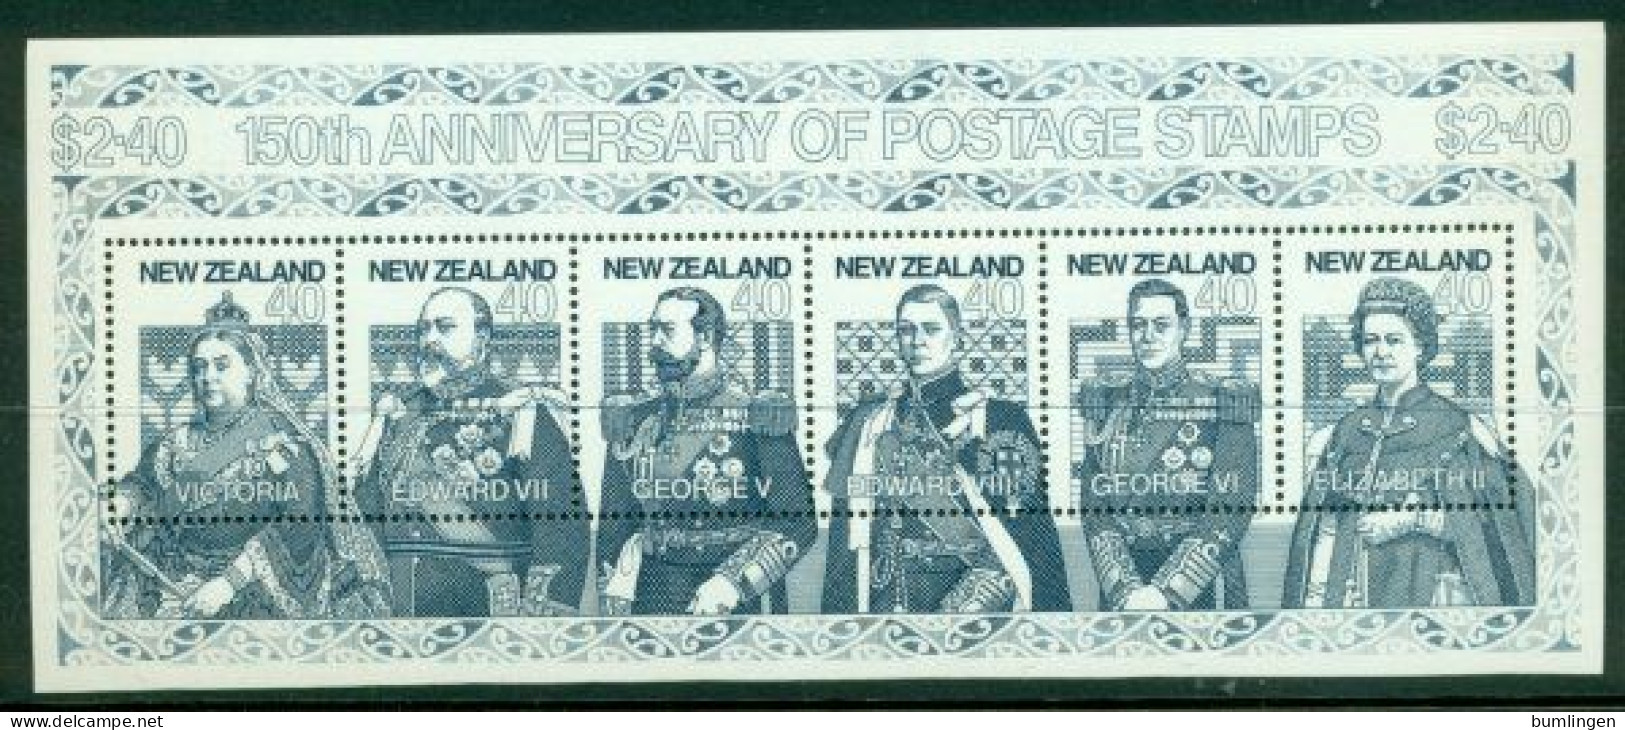 NEW ZEALAND 1990 Mi BL 27** 150th Anniversary Of Postage Stamps [B1010] - Familles Royales